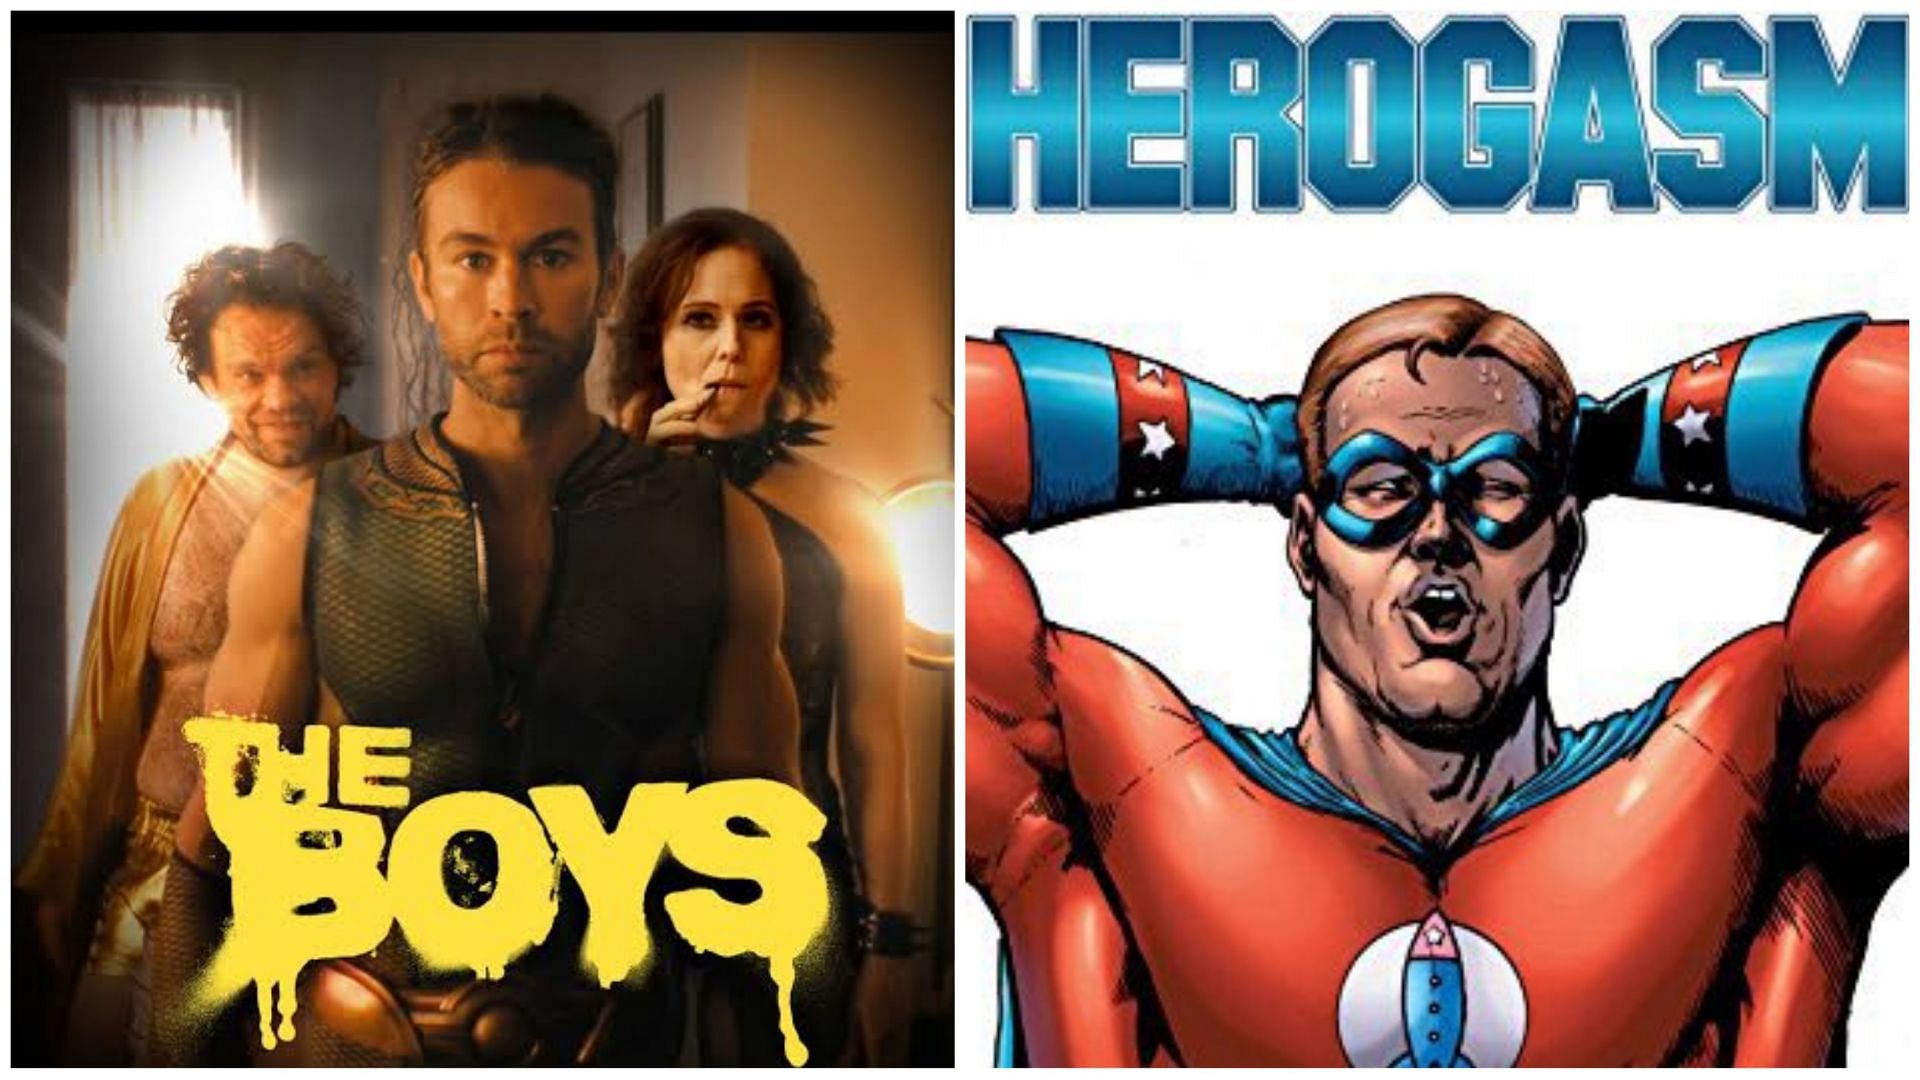 The Boys Herogasm Posters (Images via Amazon Prime Video and Dynamite Entertainment)